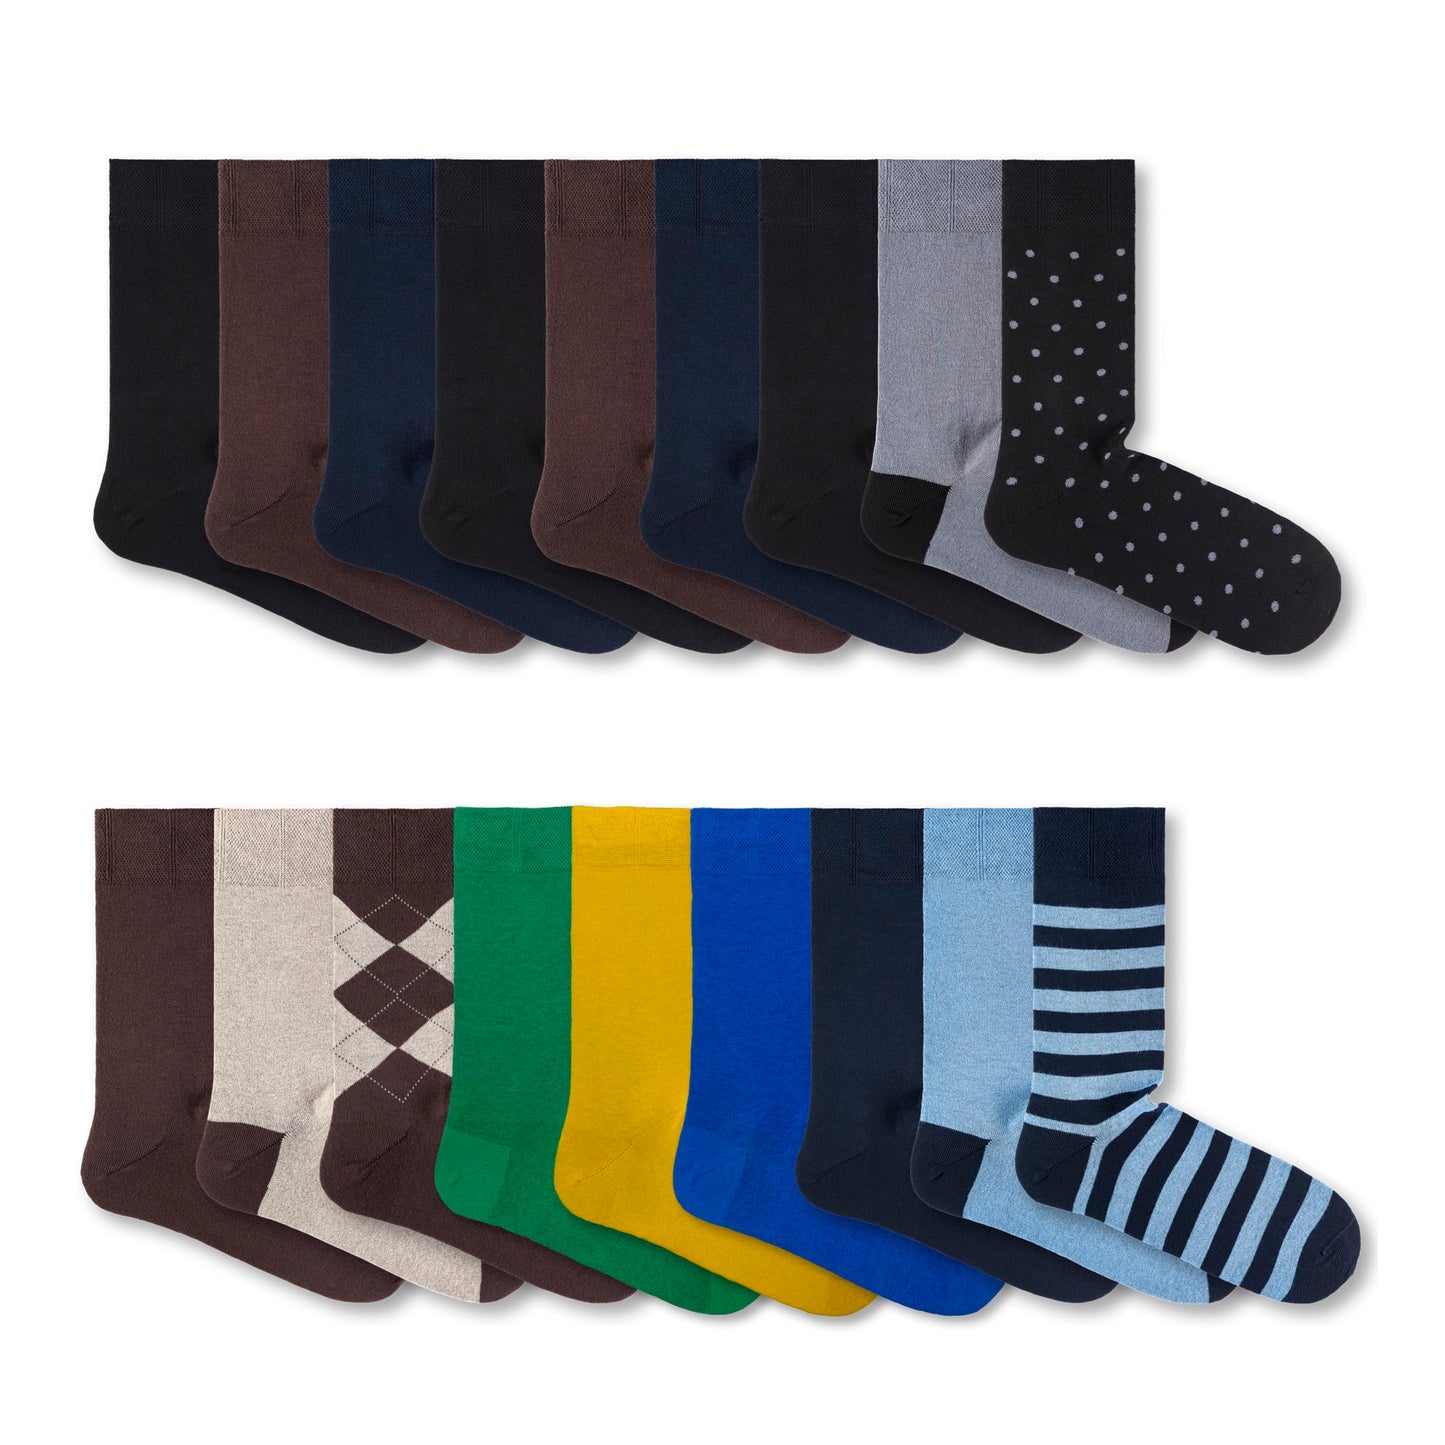 “The Crew Essentials + Colors of the Year” Sock Box / 18 pairs